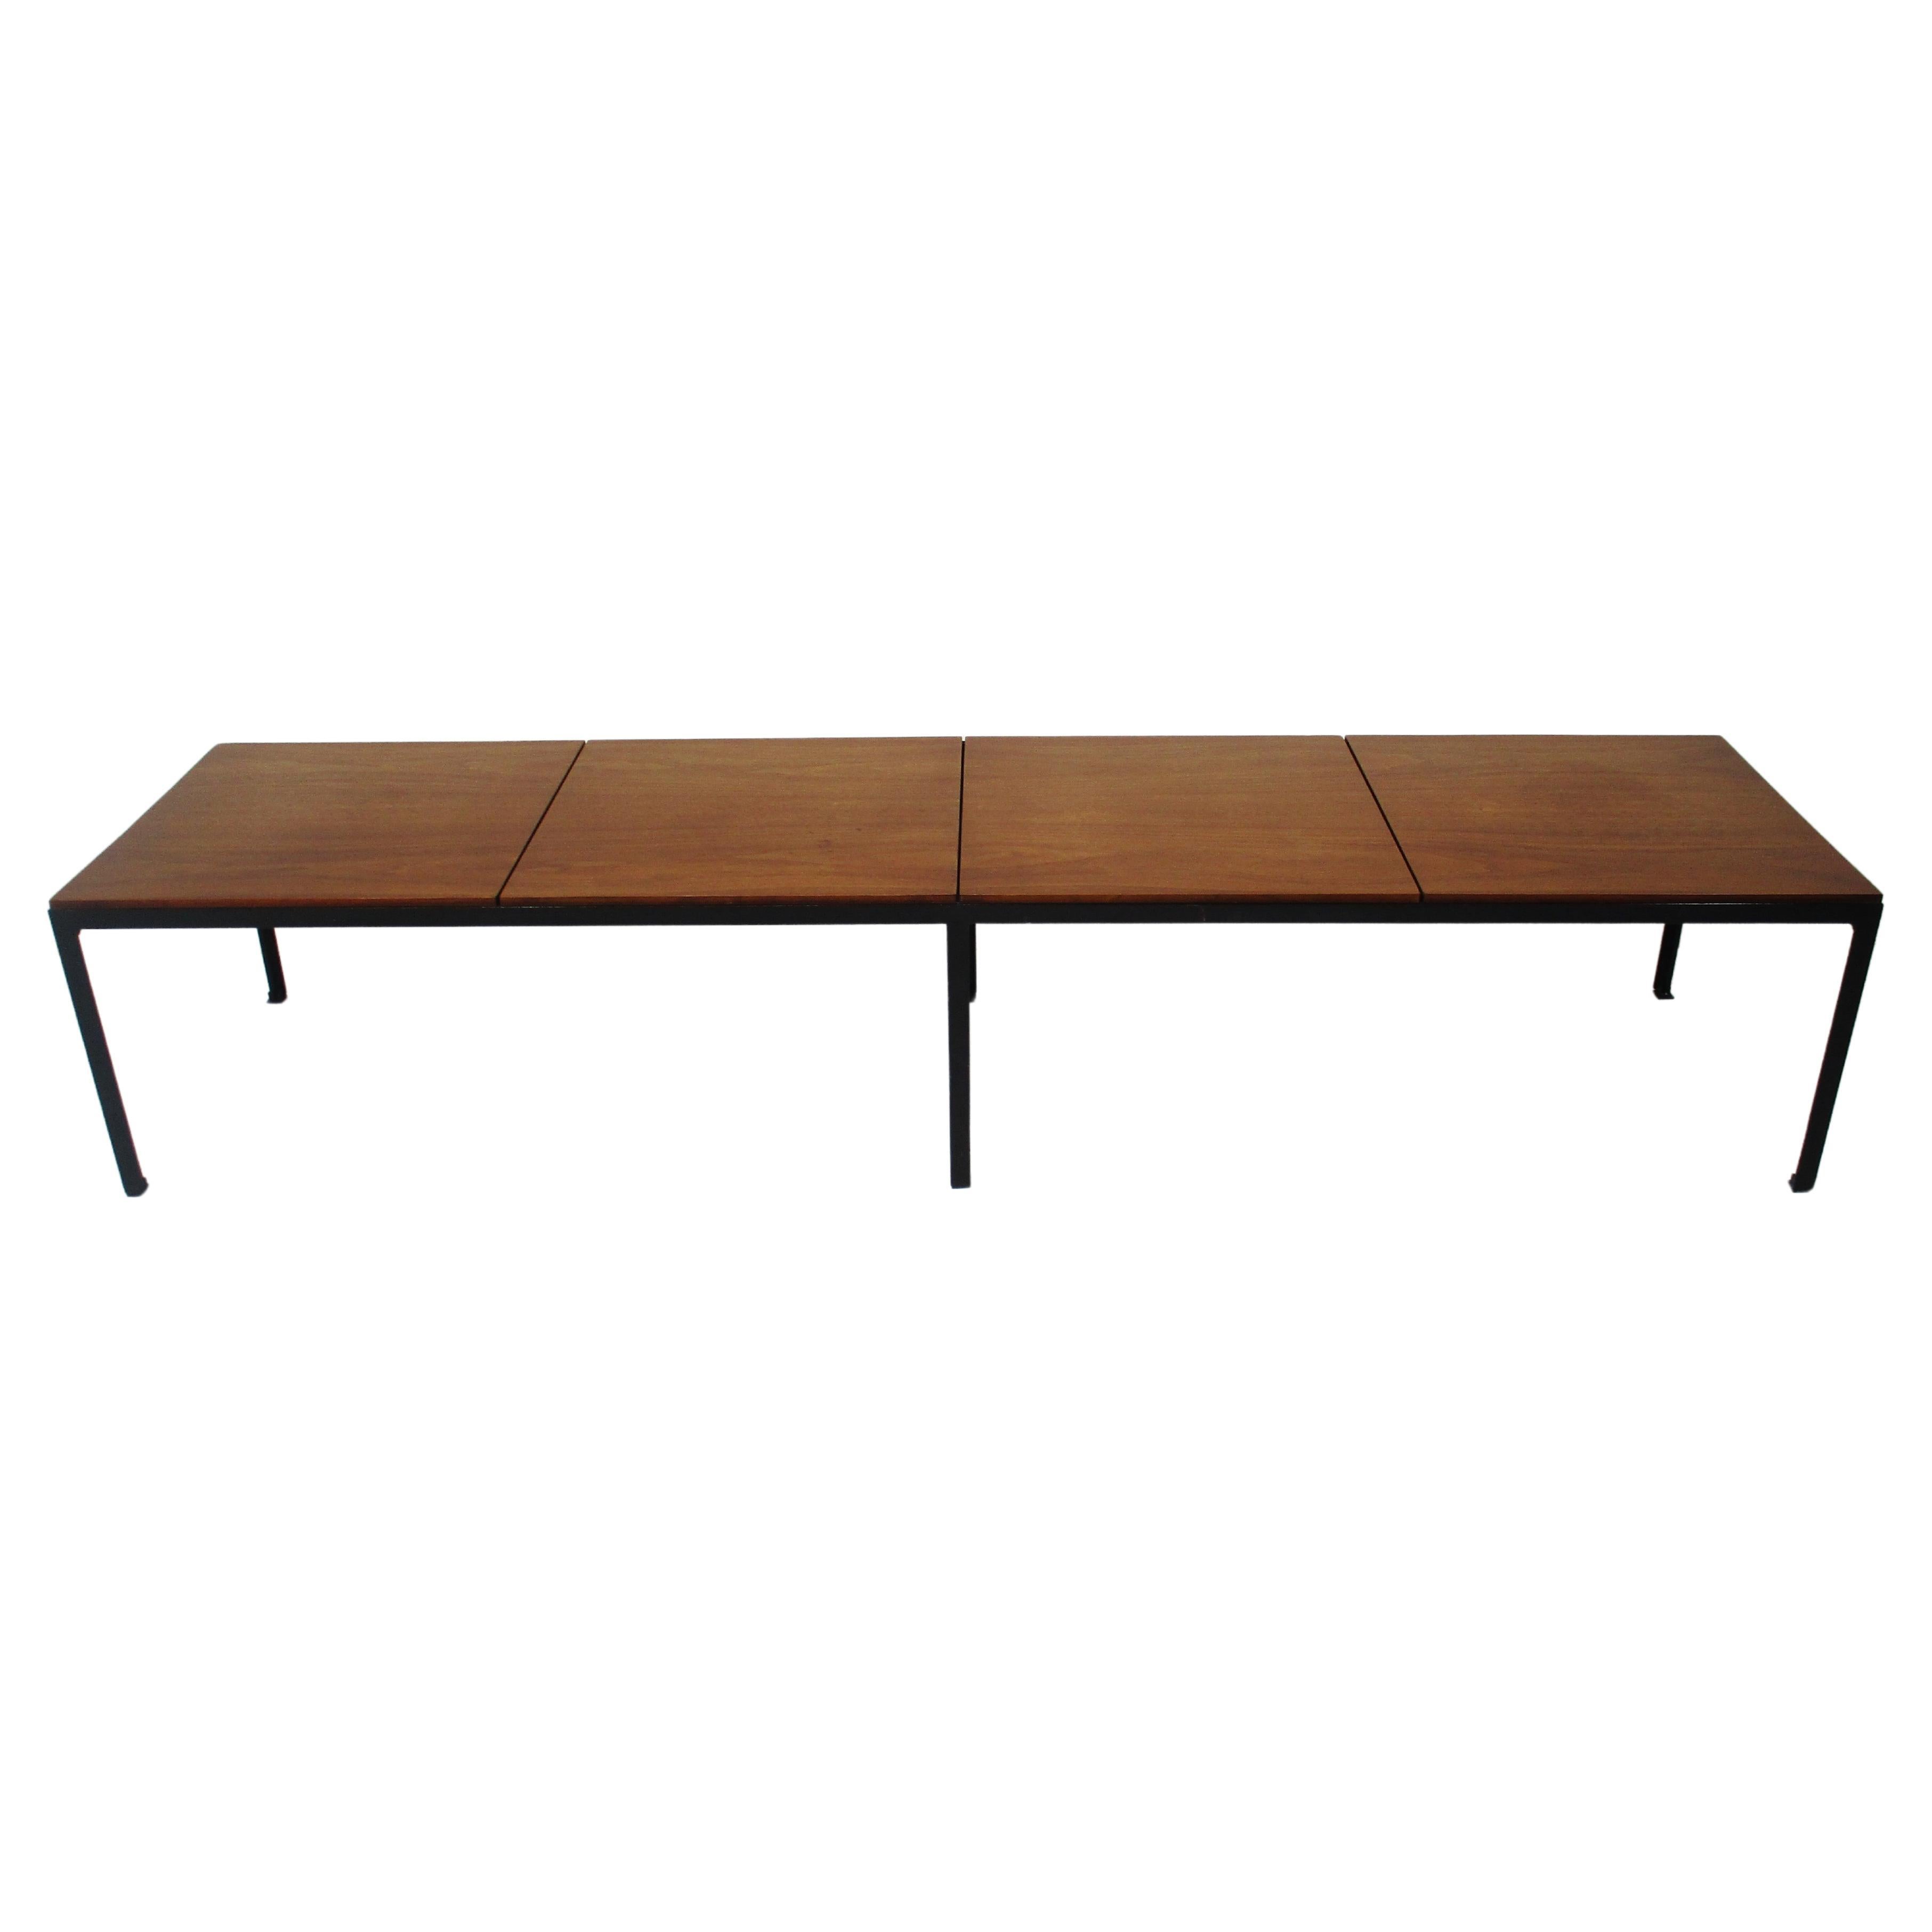 Early T Angle Walnut Coffee Table / Bench by Florence Knoll # 332 for Knoll (A)  For Sale